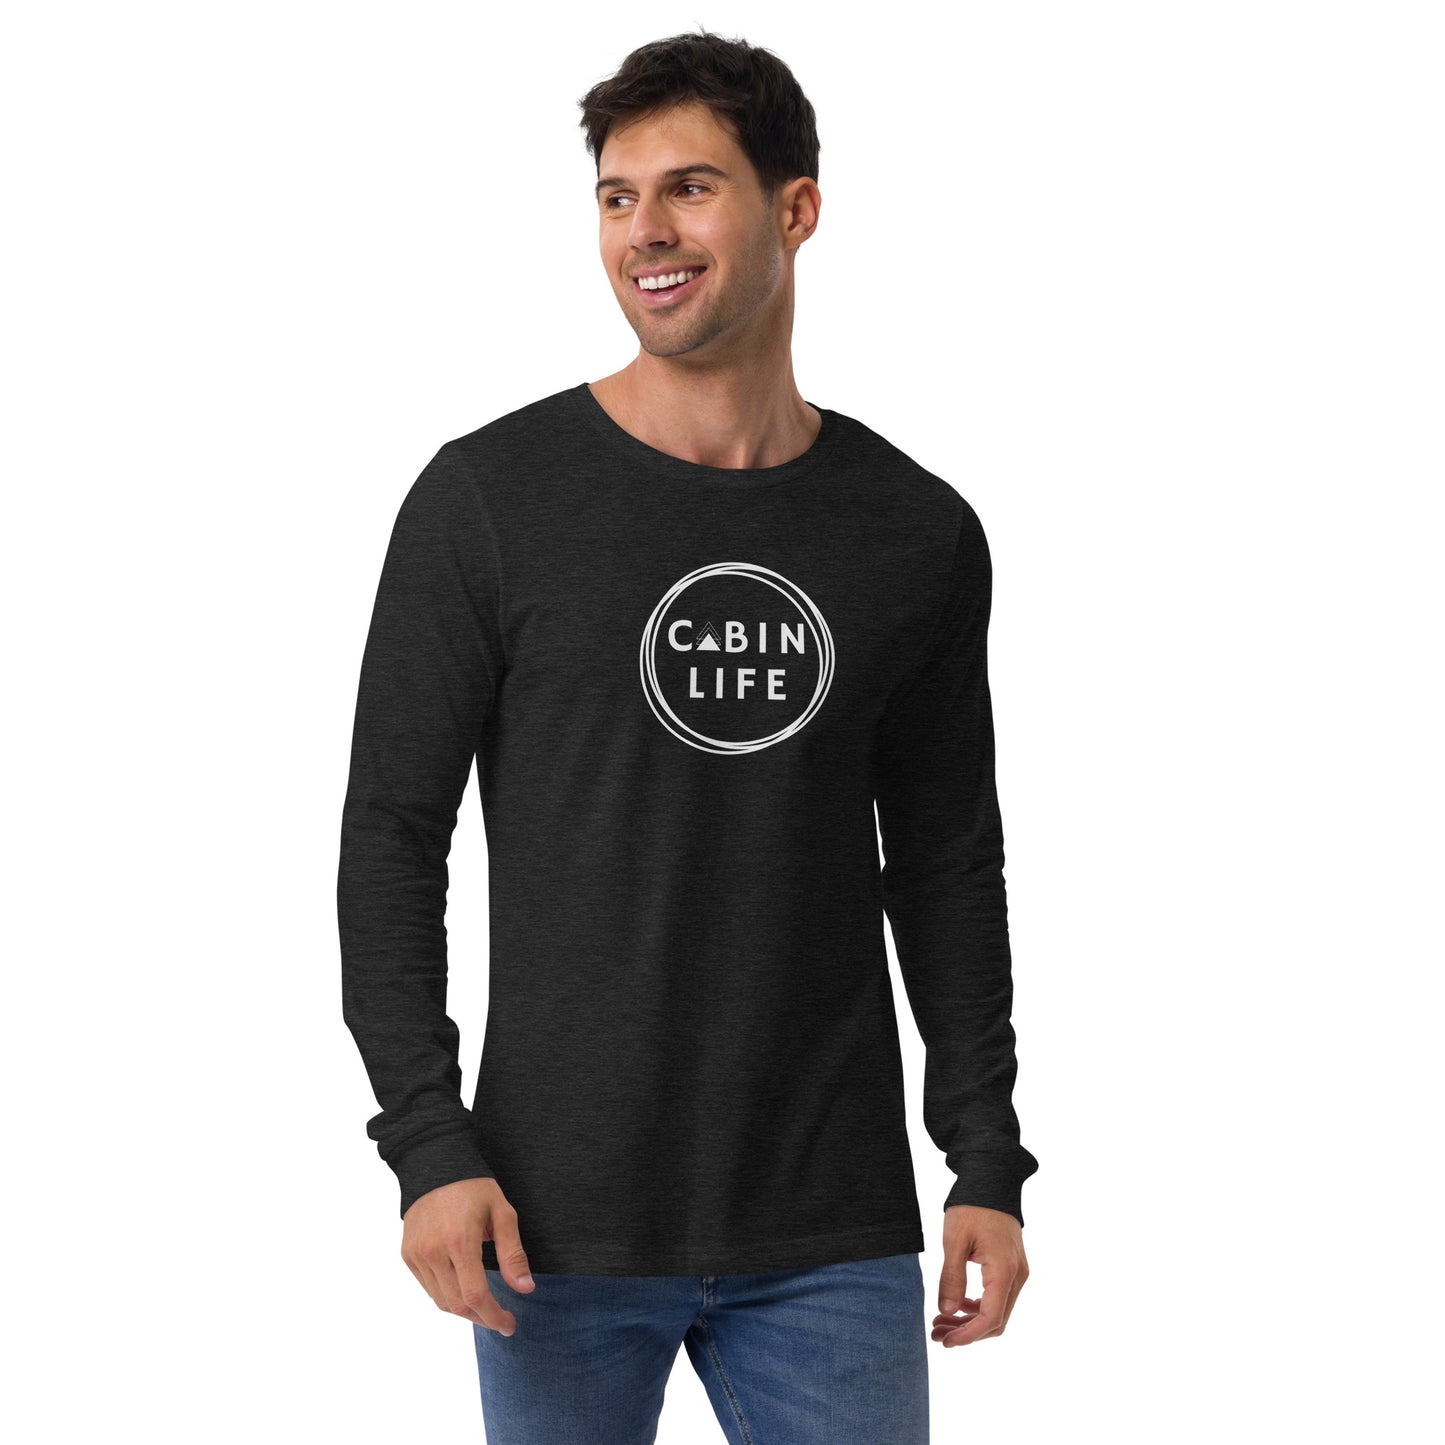 cabin life tshirt longsleeve t-shirt top shirt cozy clothing aframe a-frame woods forest wear circle graphic triangle comfy bella canvas 